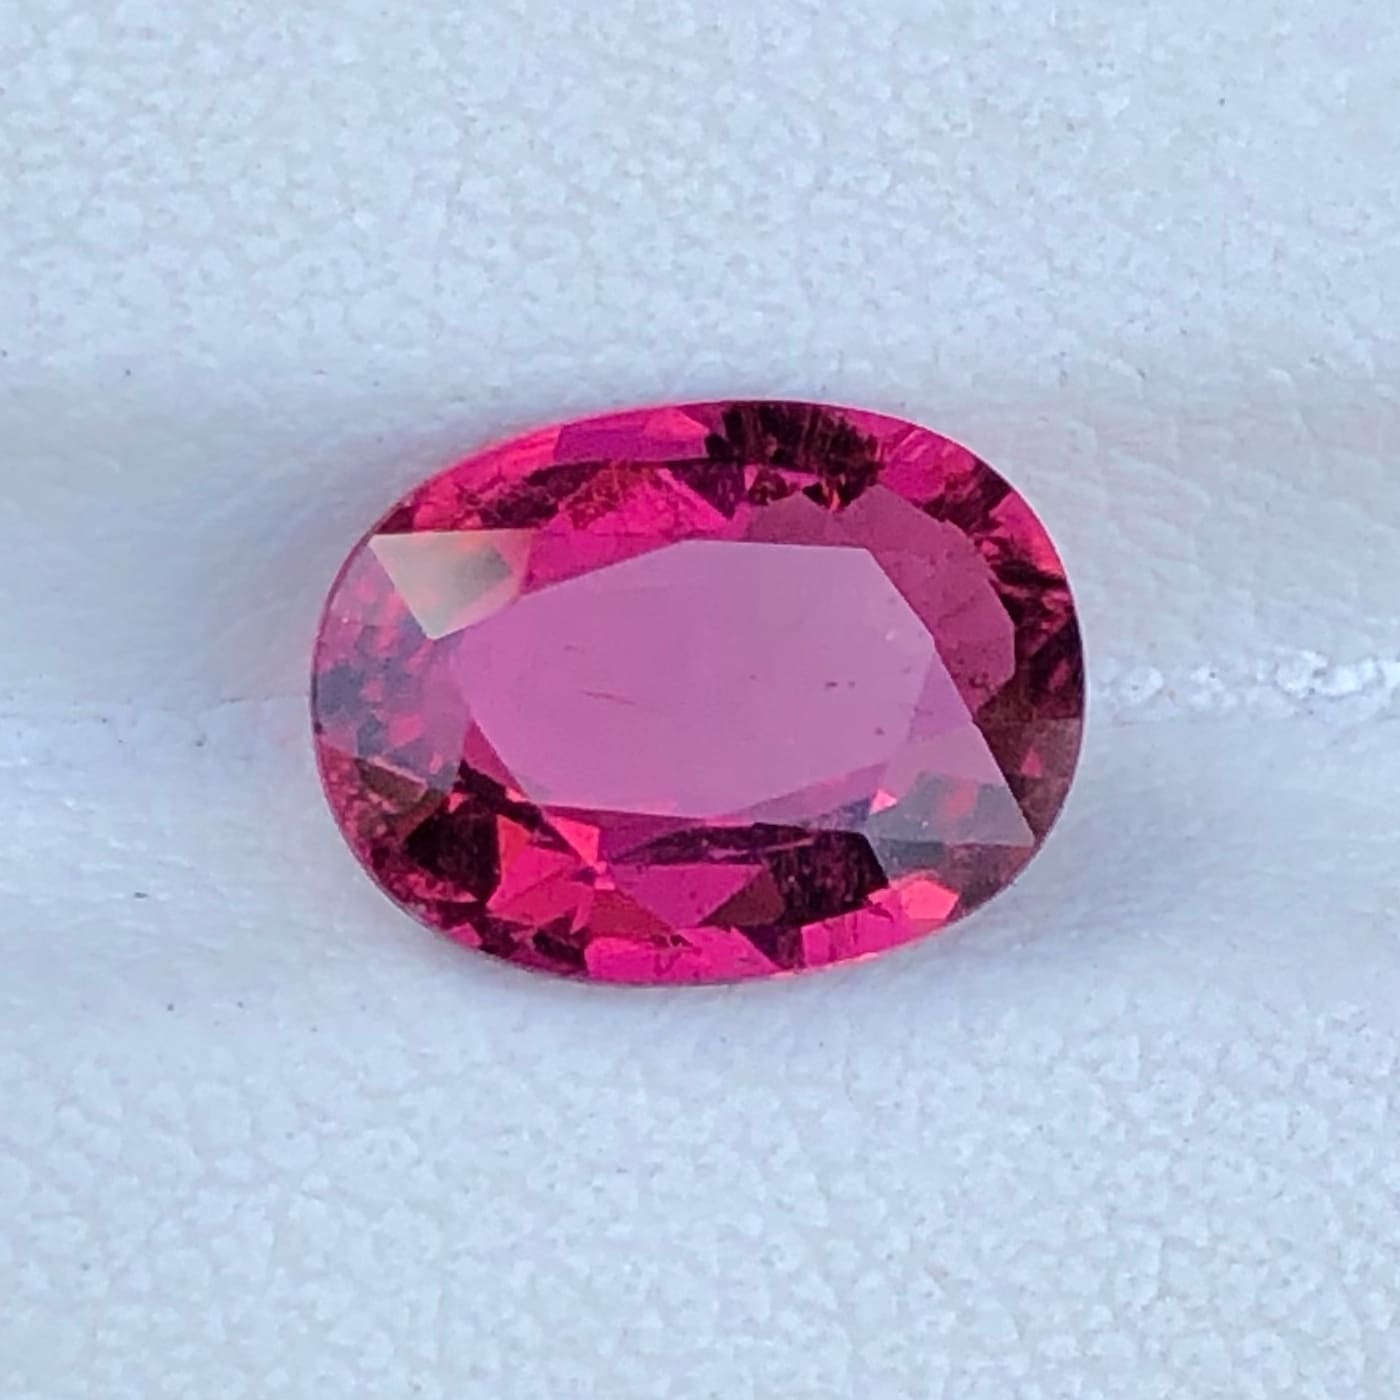 Buy 2.15cts Loose Tourmaline Online